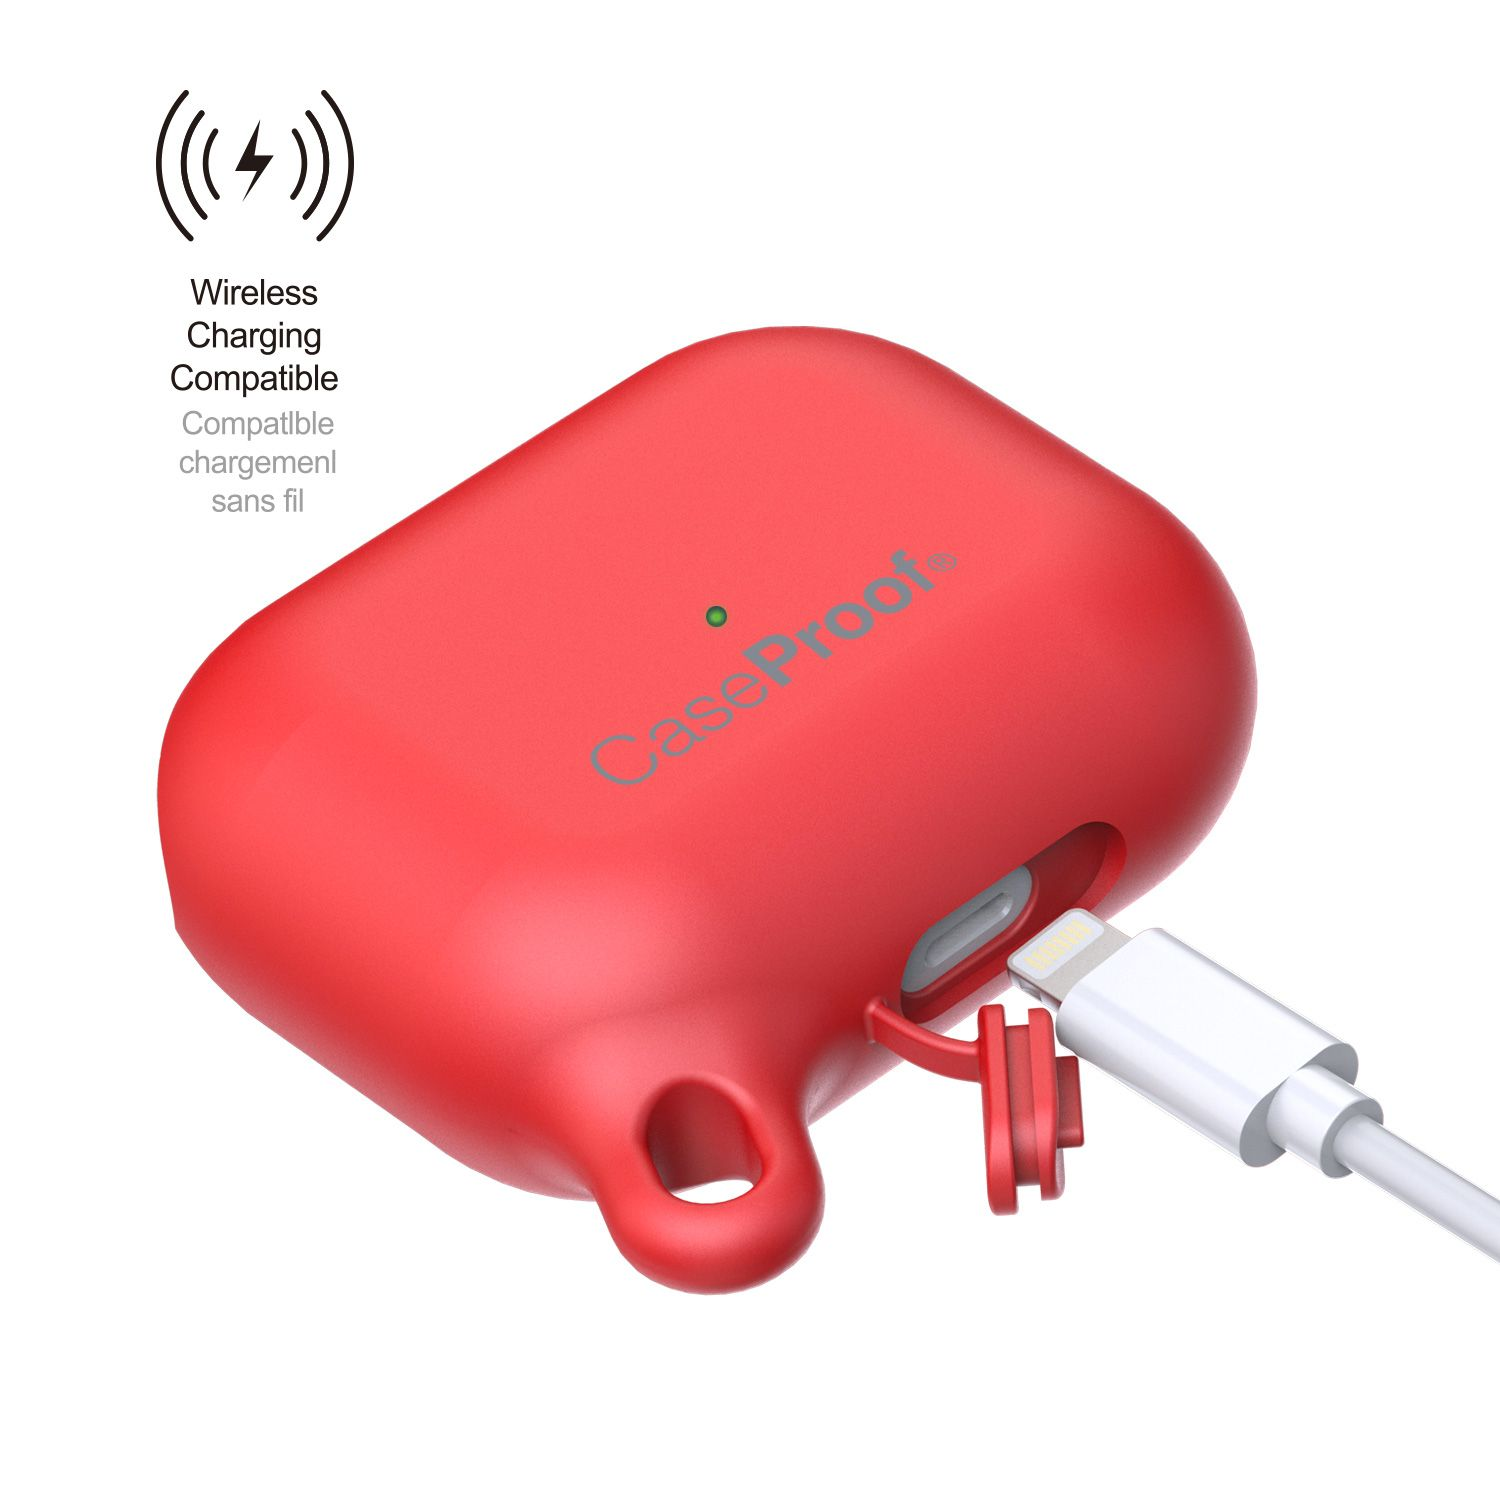 CASEPROOF waterproof case, Backcover, APPLE, RED AIRPODS PRO